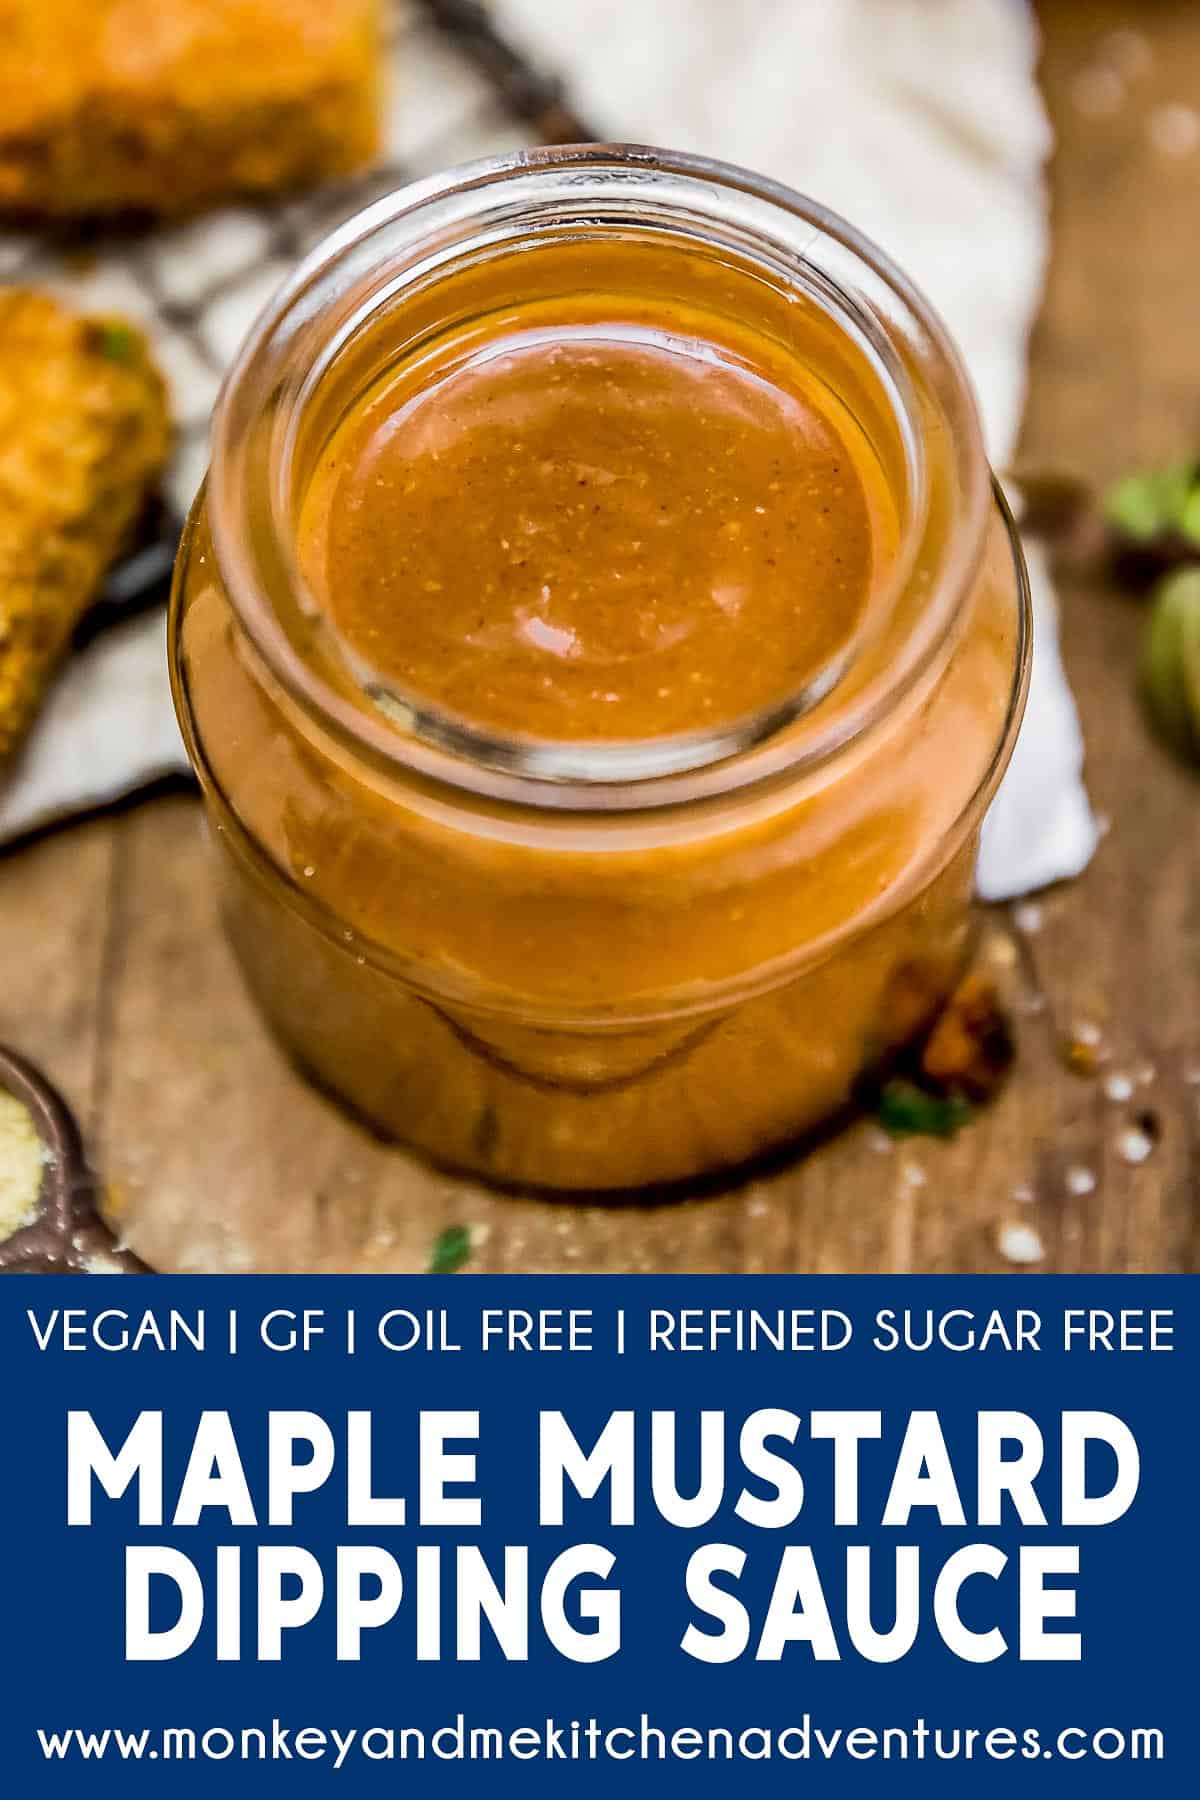 Maple Mustard Dipping Sauce with text description